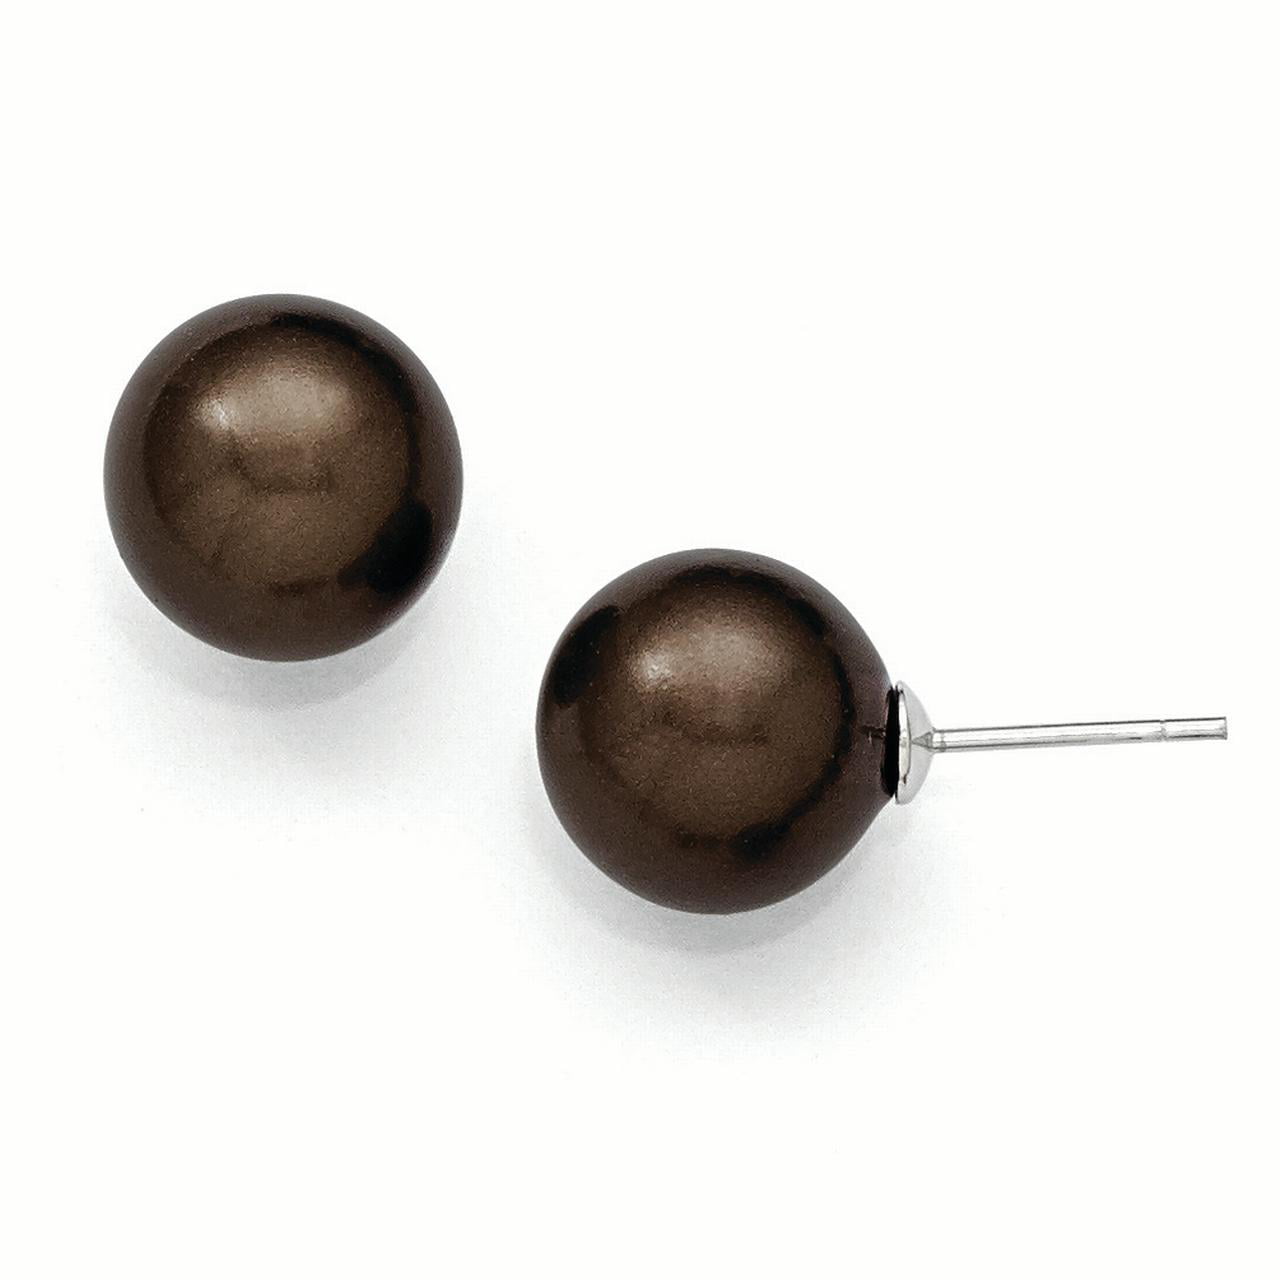 12 to 13 mm Range range Ball Earrings Jewelry Sterling Silver Majestik 12-13mm Round Brown Shell Bead Stud Earrings Solid 12 to 13 mm 